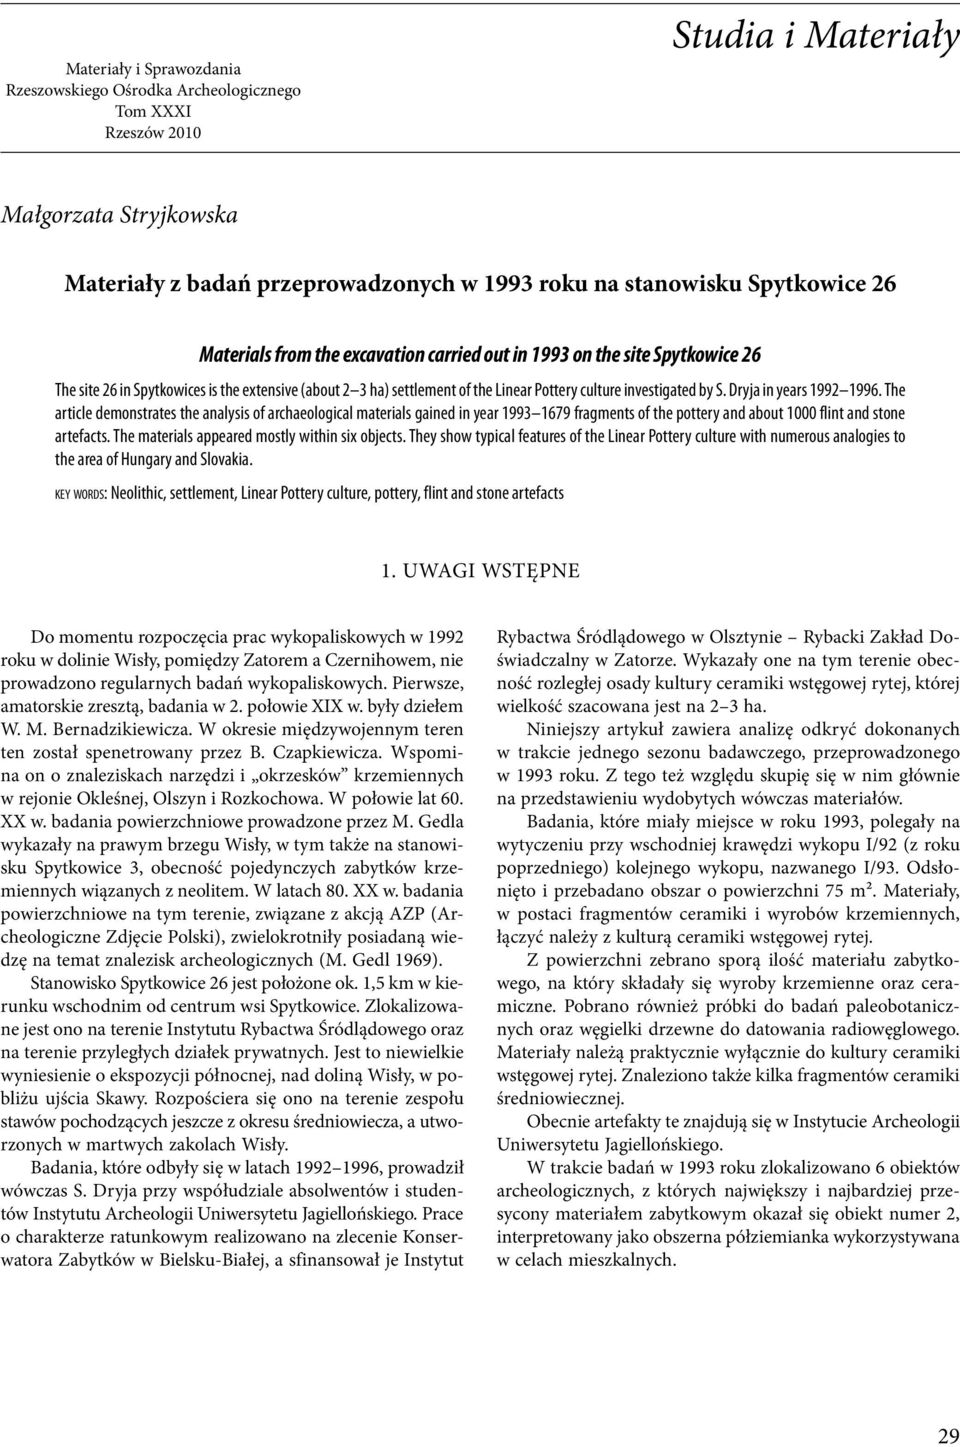 Dryja in years 1992 1996. The article demonstrates the analysis of archaeological materials gained in year 1993 1679 fragments of the pottery and about 1000 flint and stone artefacts.